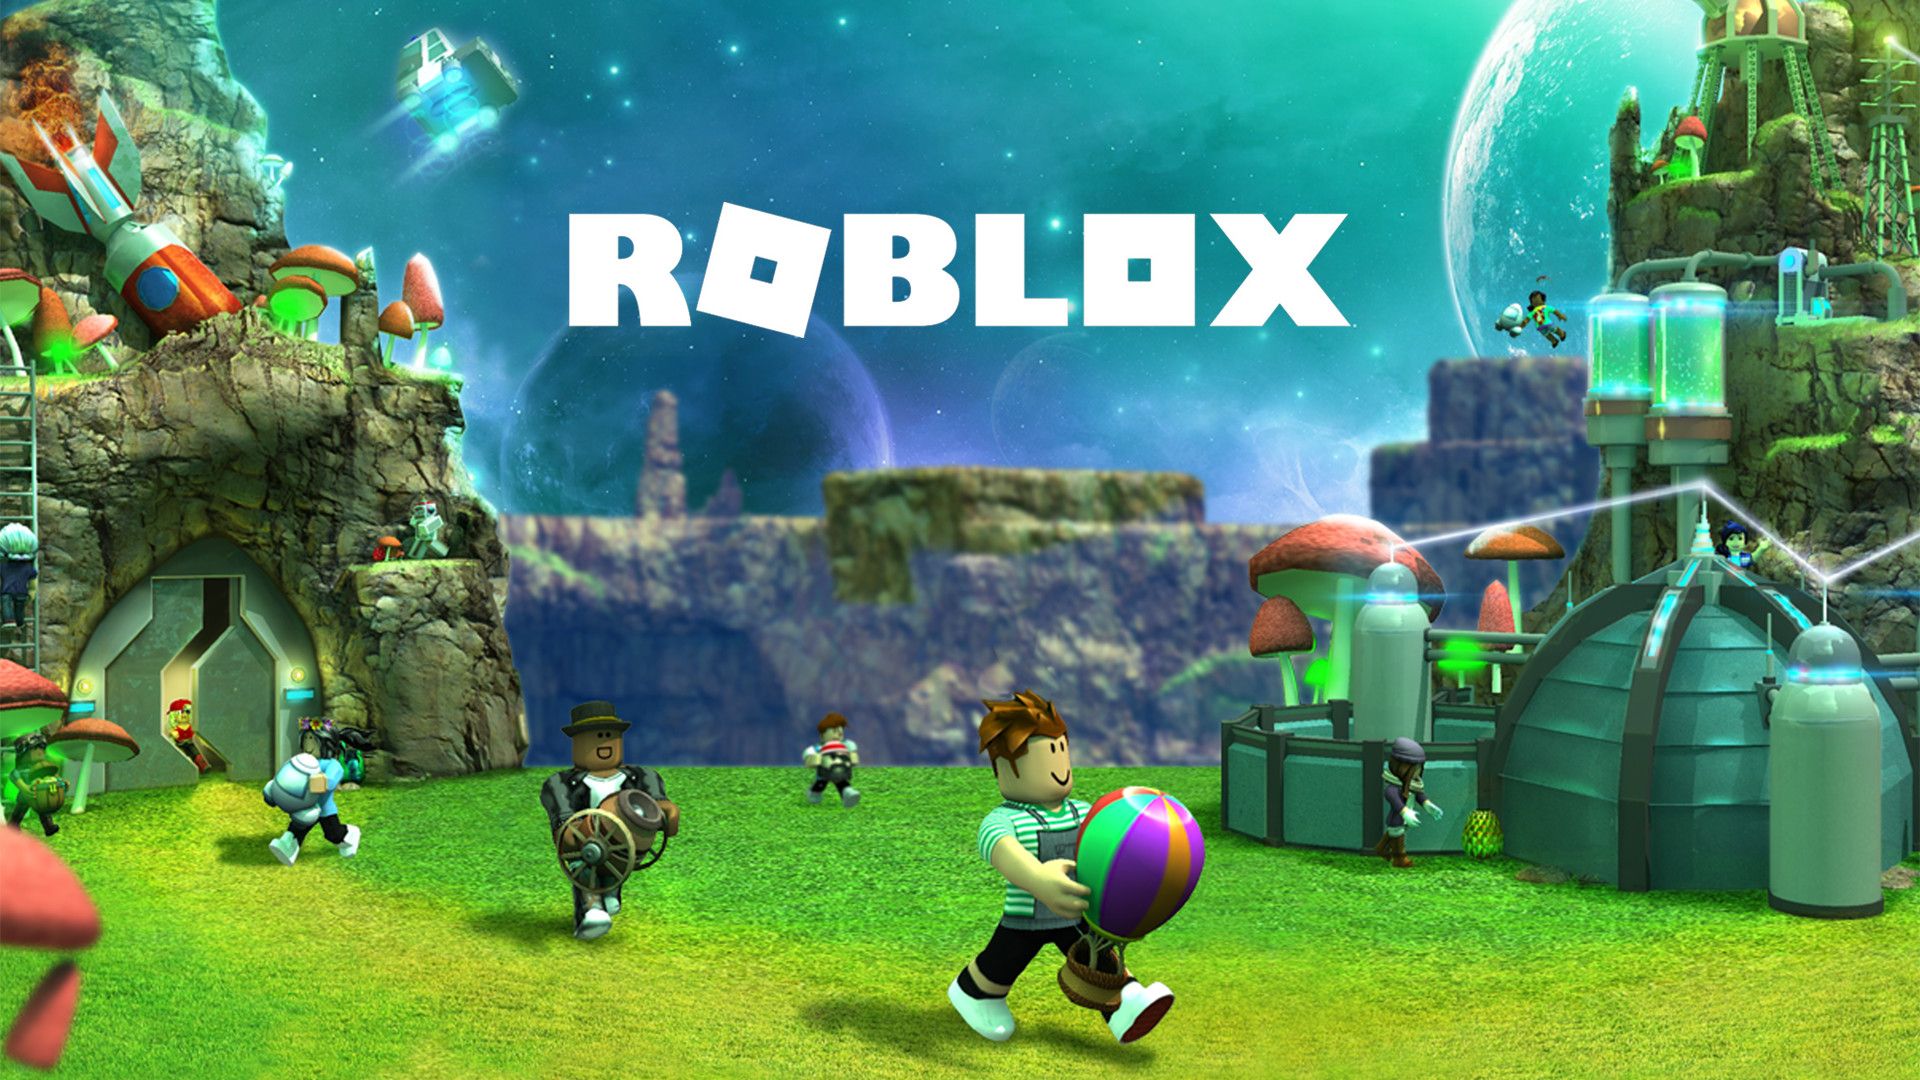 Roblox Wallpaper background picture